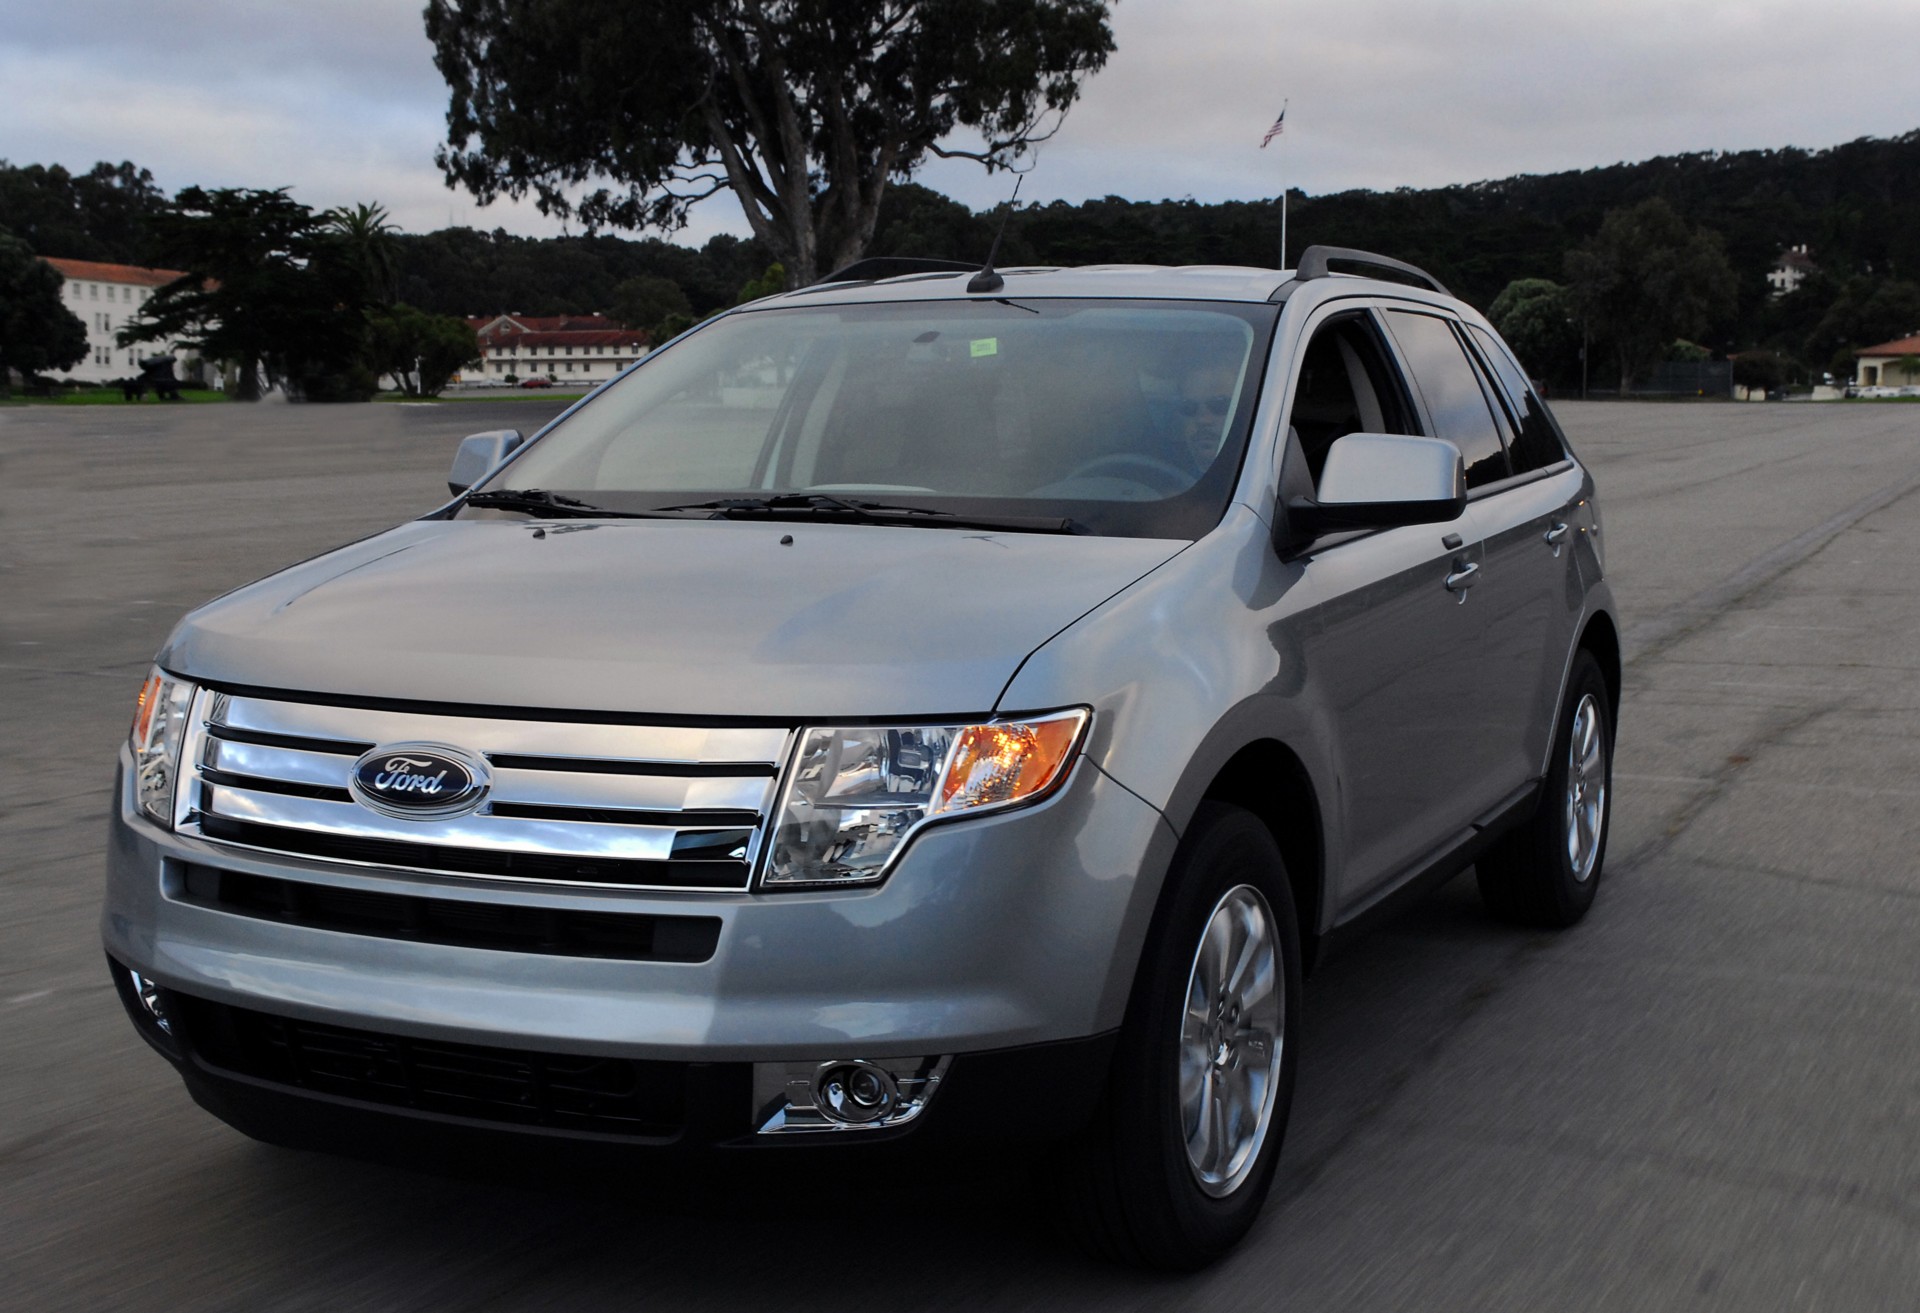 2007 ford edge images